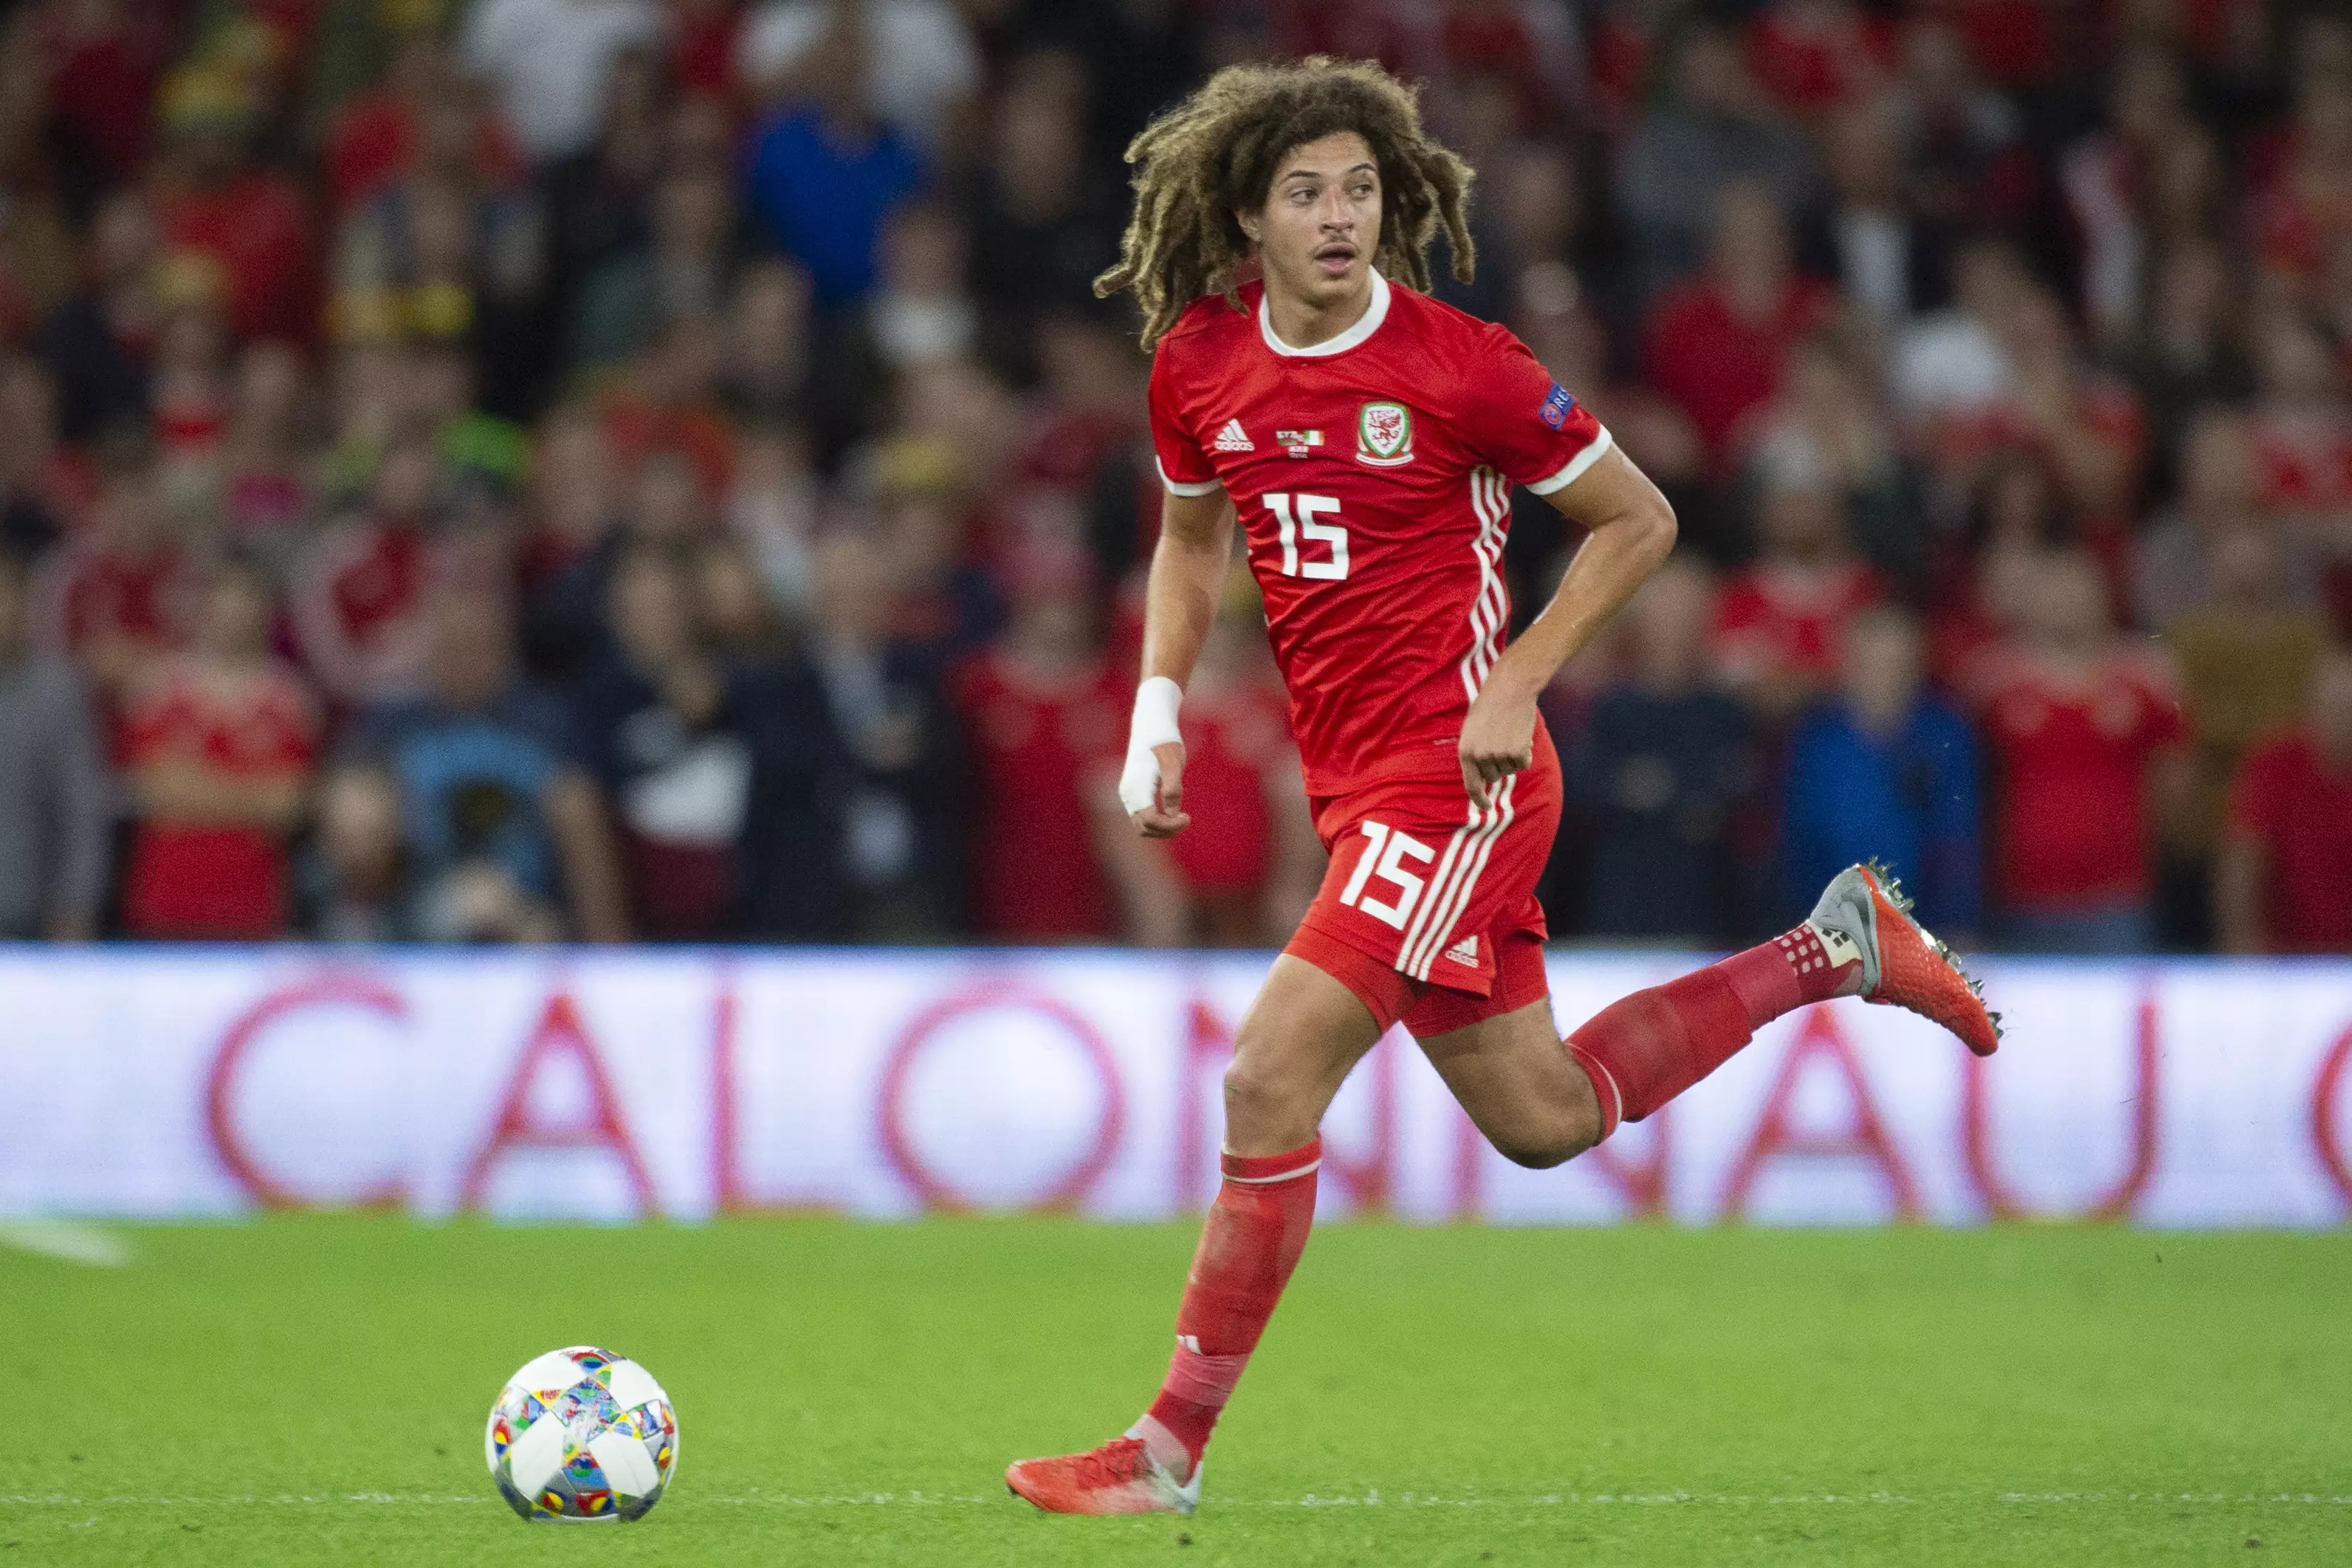 Ampadu was excellent in the games against Ireland. Image: PA Images